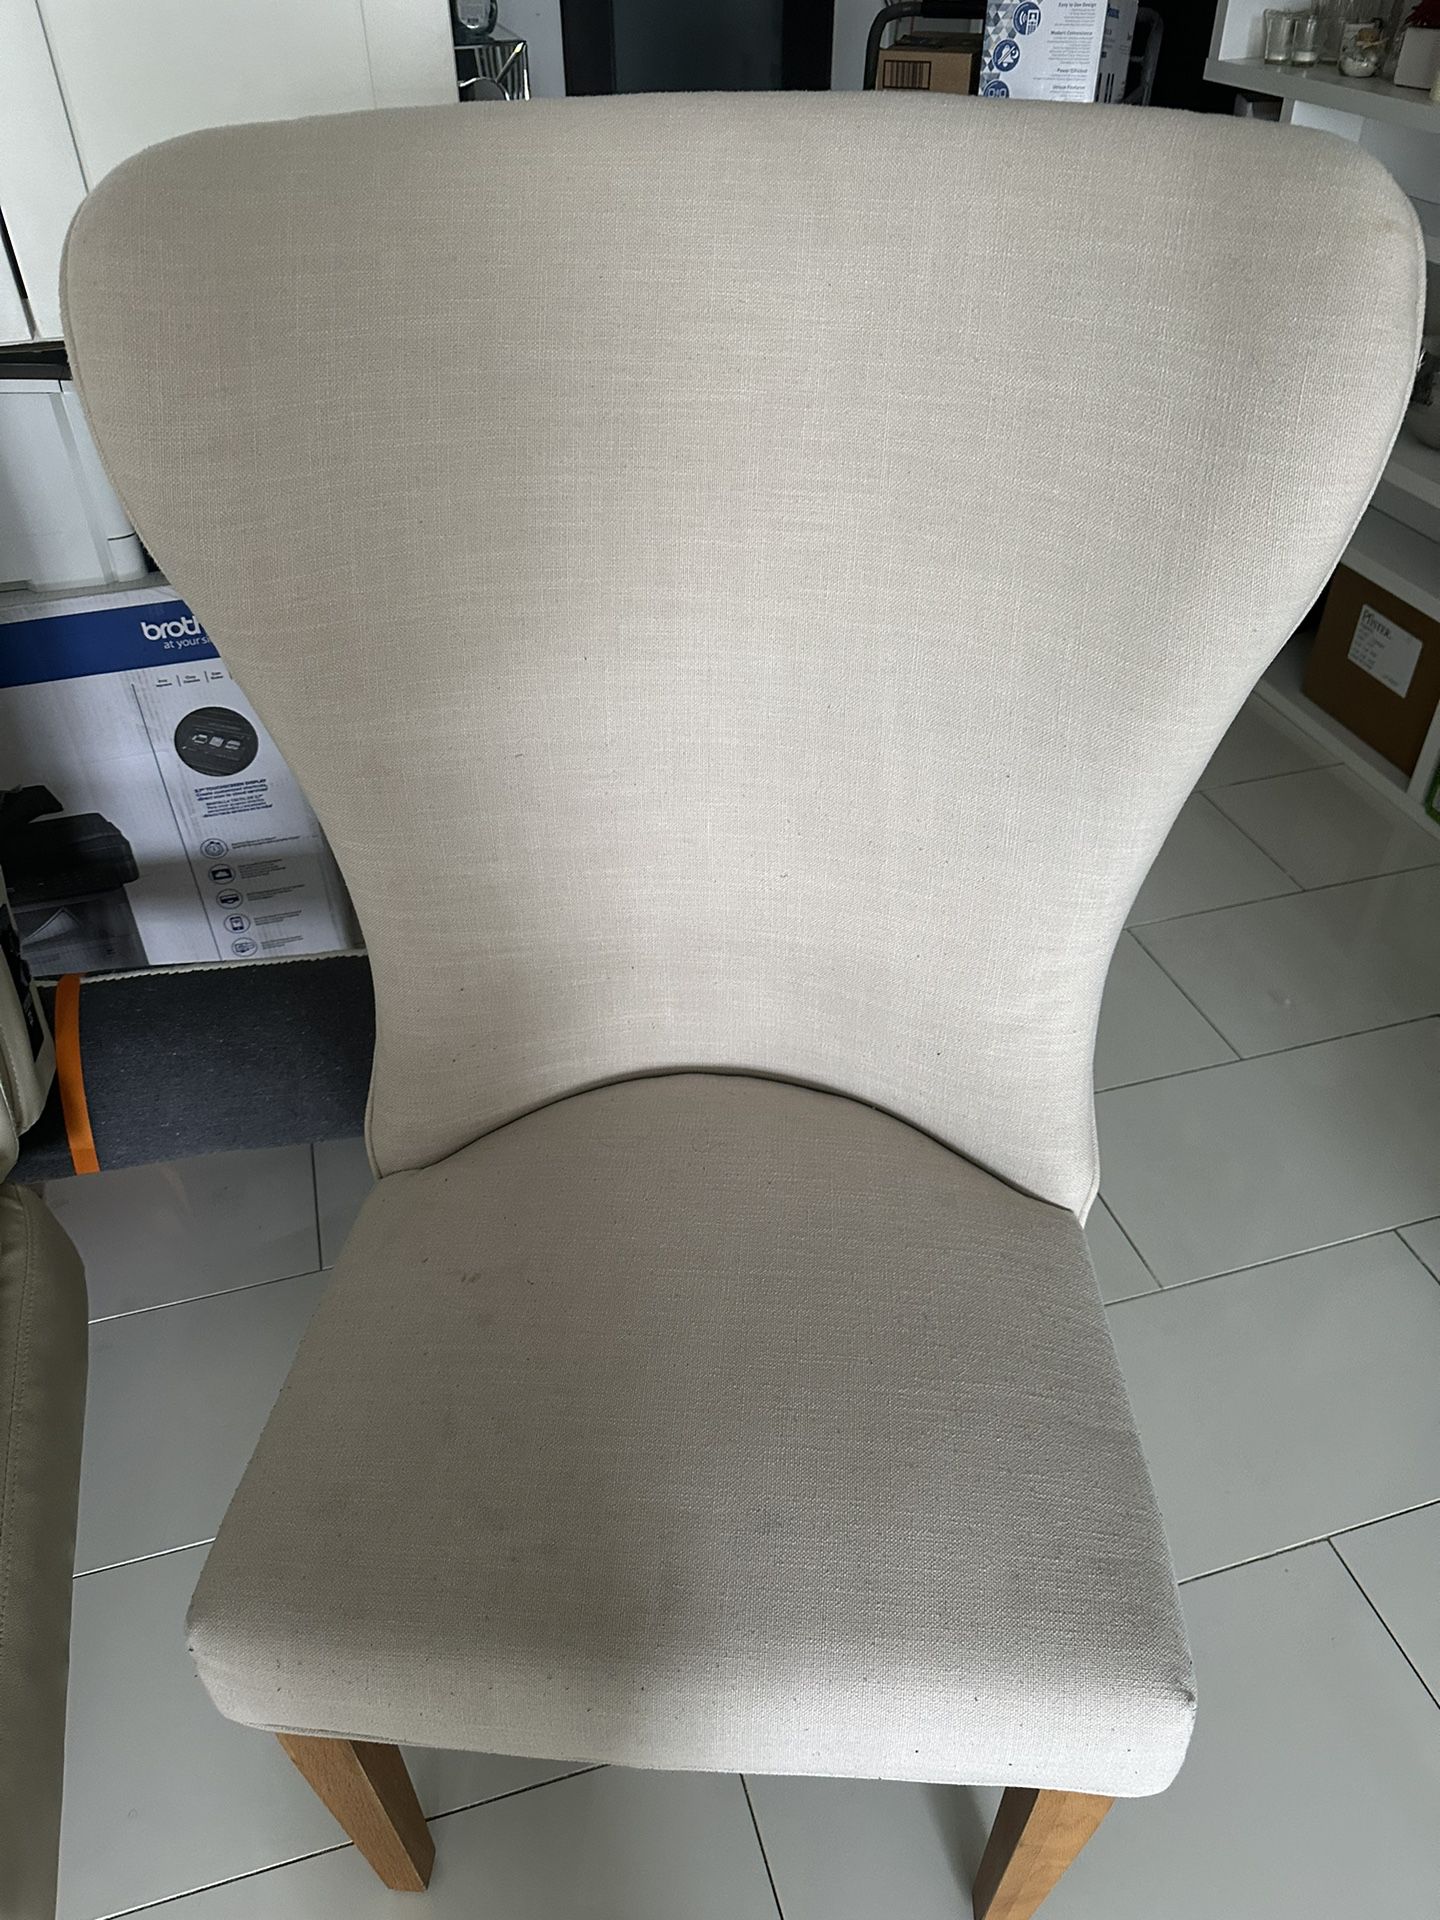 West Elm Wingback Chair Used - 1 Available 